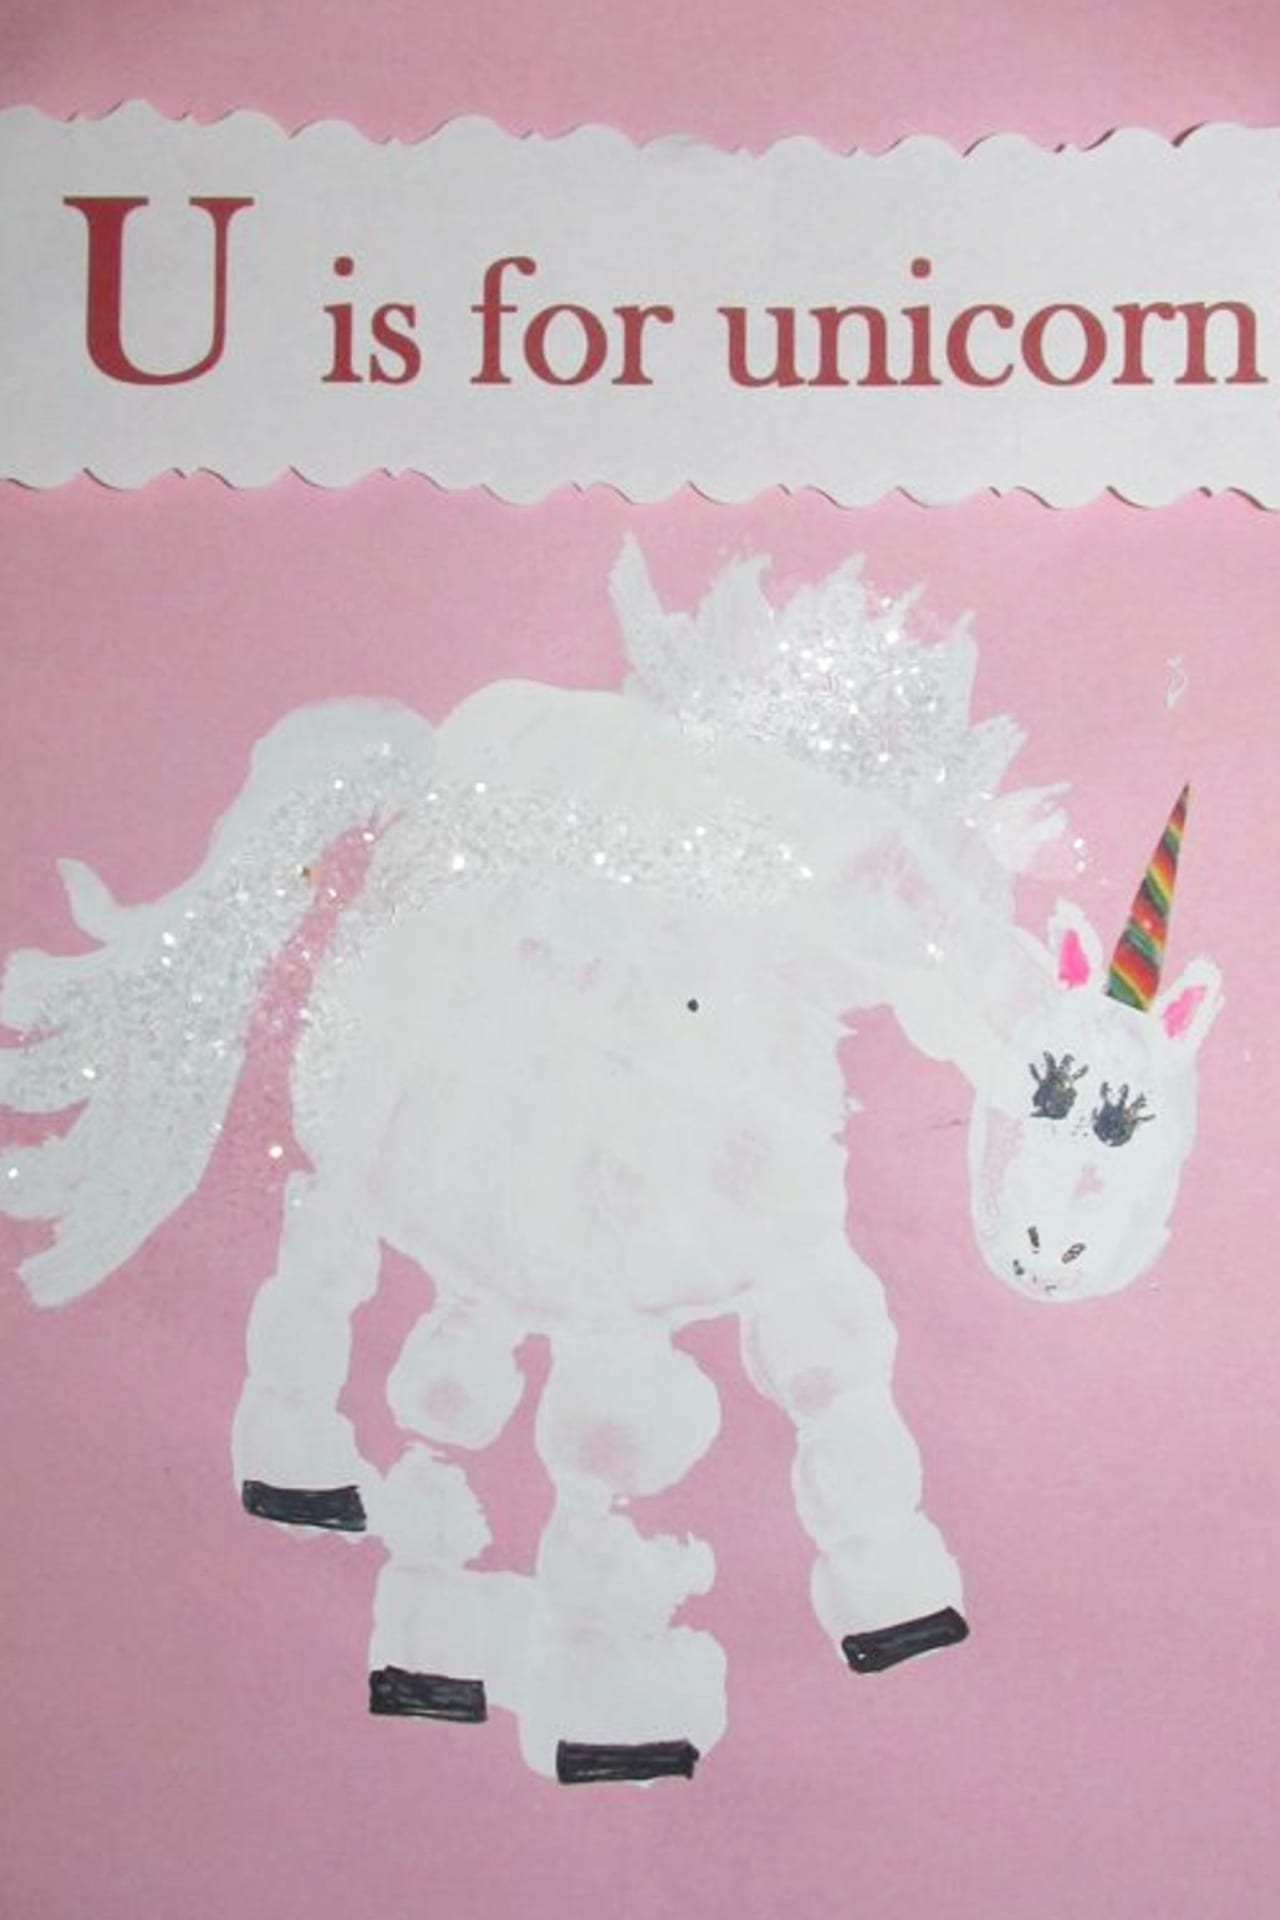 Unicorn Crafts for kids - fun and easy unicorn handprint crafts for kids to make at school, home or at a unicorn birthday party